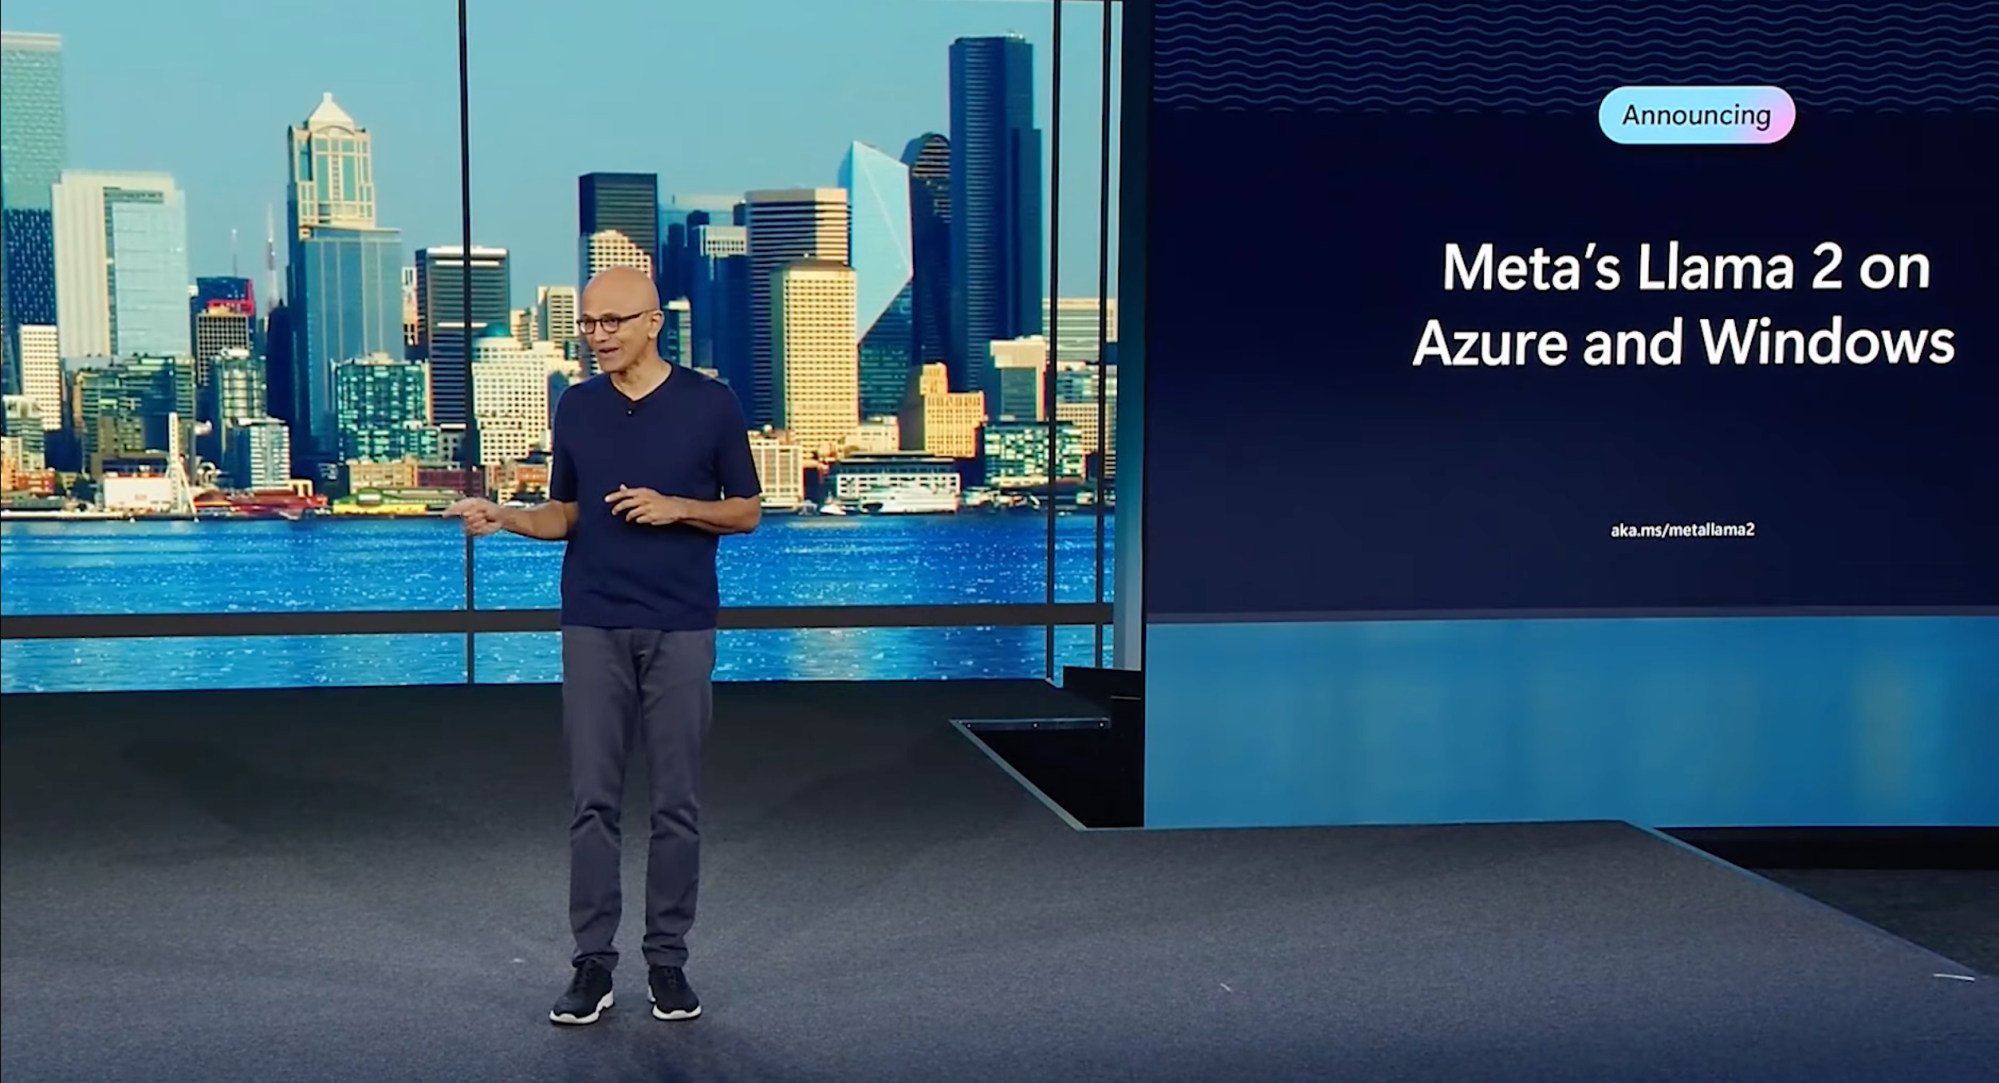 Microsoft Corp chief executive Satya Nadella announces the company’s partnership with Meta Platforms to incorporate the open-source Llama 2 large language model into its Windows operating system and Azure cloud computing platform on July 18, 2023. Photo: Handout